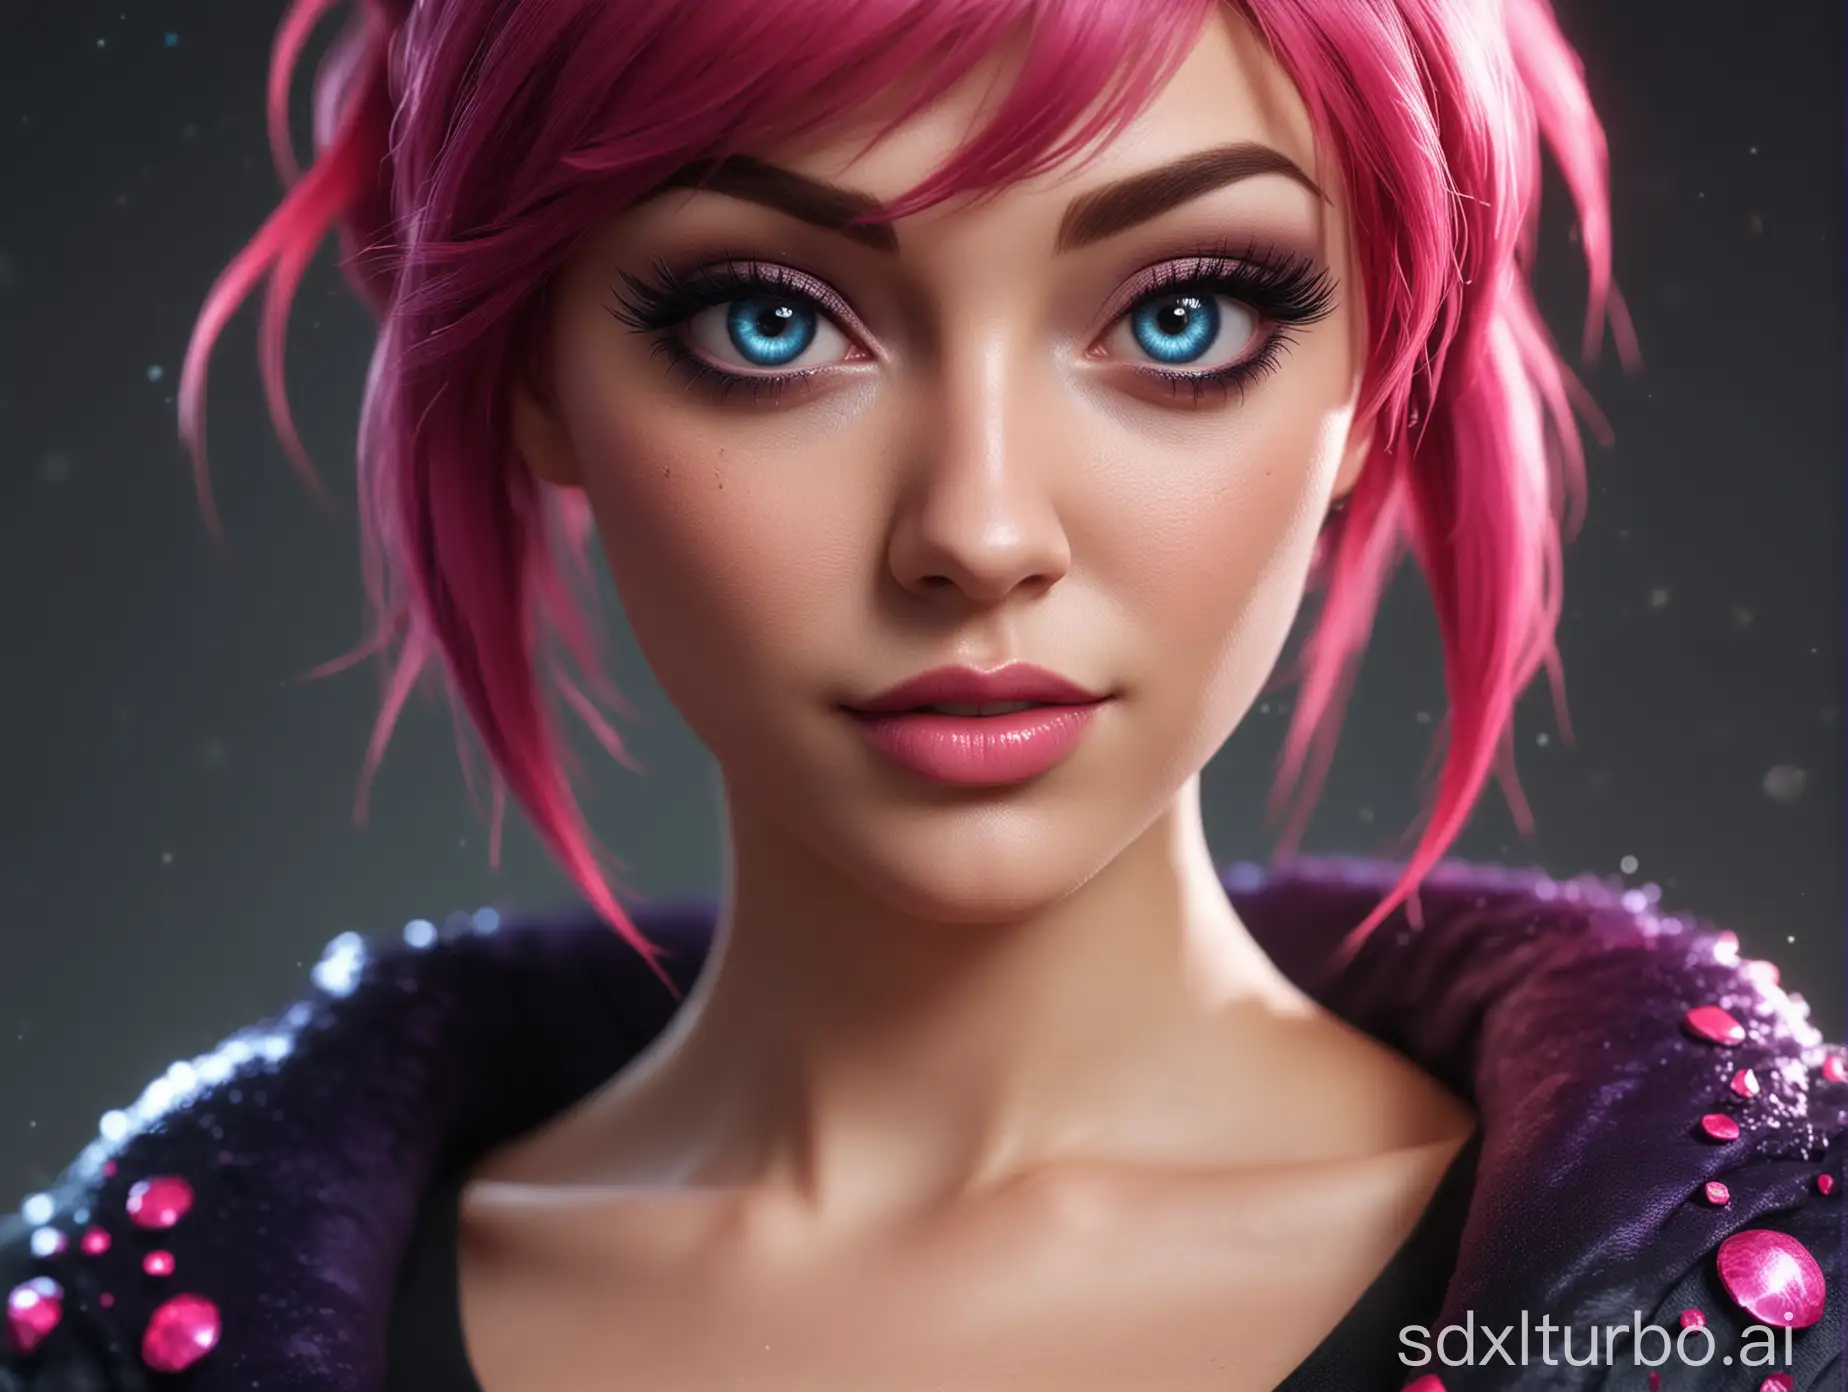 real-life Evelynn from League of Legends at macro scale, focus on details, focus of depth of perception, focus on small imperfections, 8k, particles in the air, ambient occlusion, natural hairs